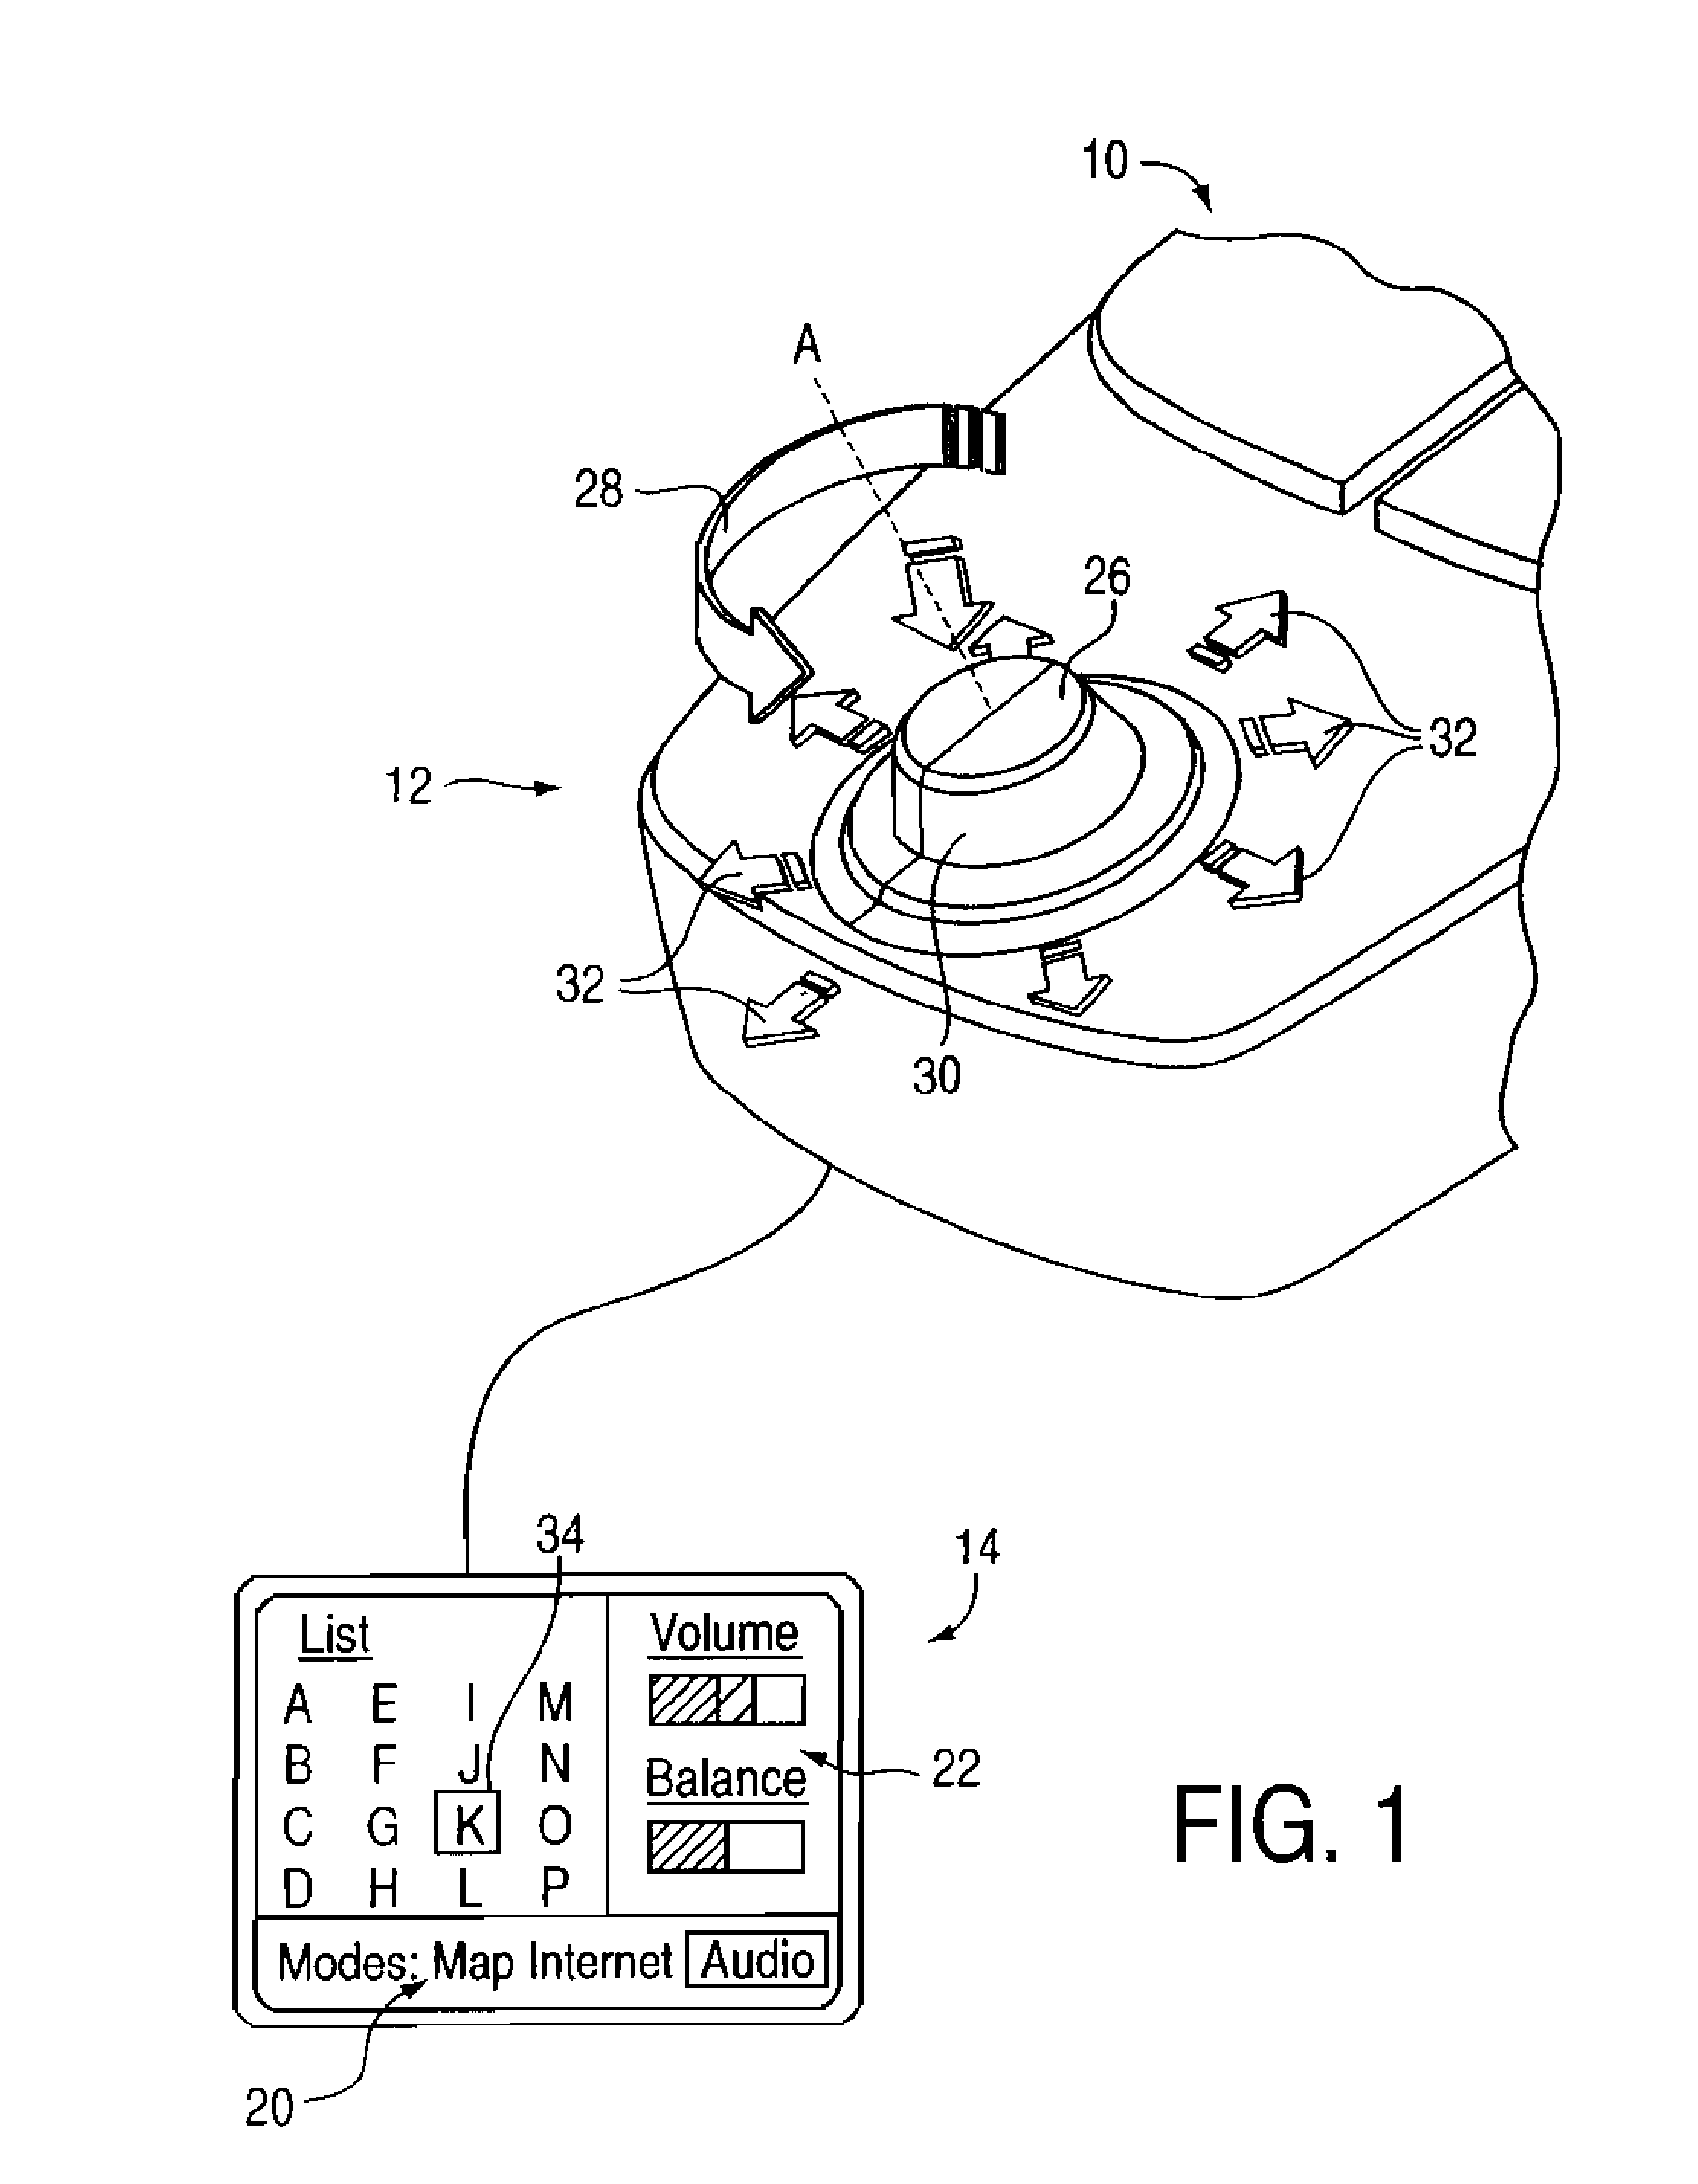 Systems and Methods for Haptic Feedback Effects for Control Knobs